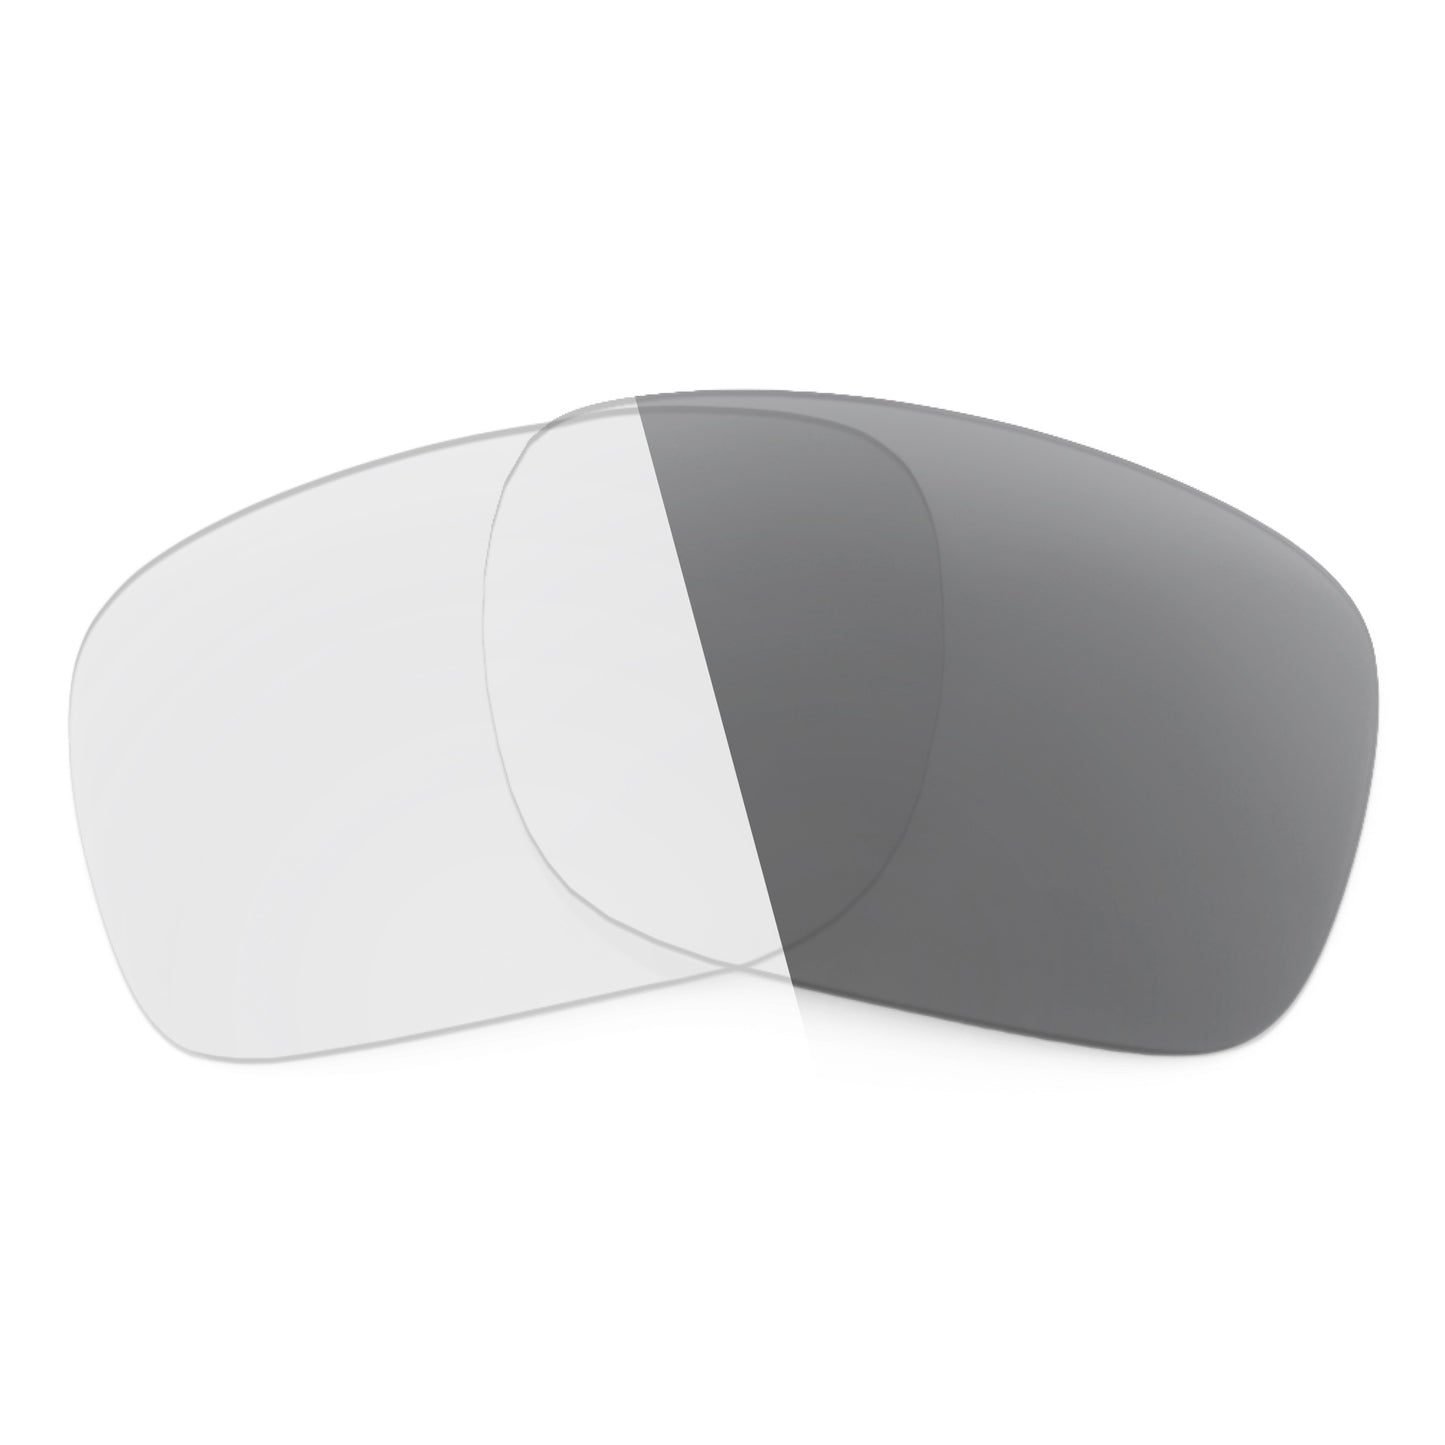 Revant replacement lenses for Ray-Ban RB3522 61mm Non-Polarized Adapt Gray Photochromic